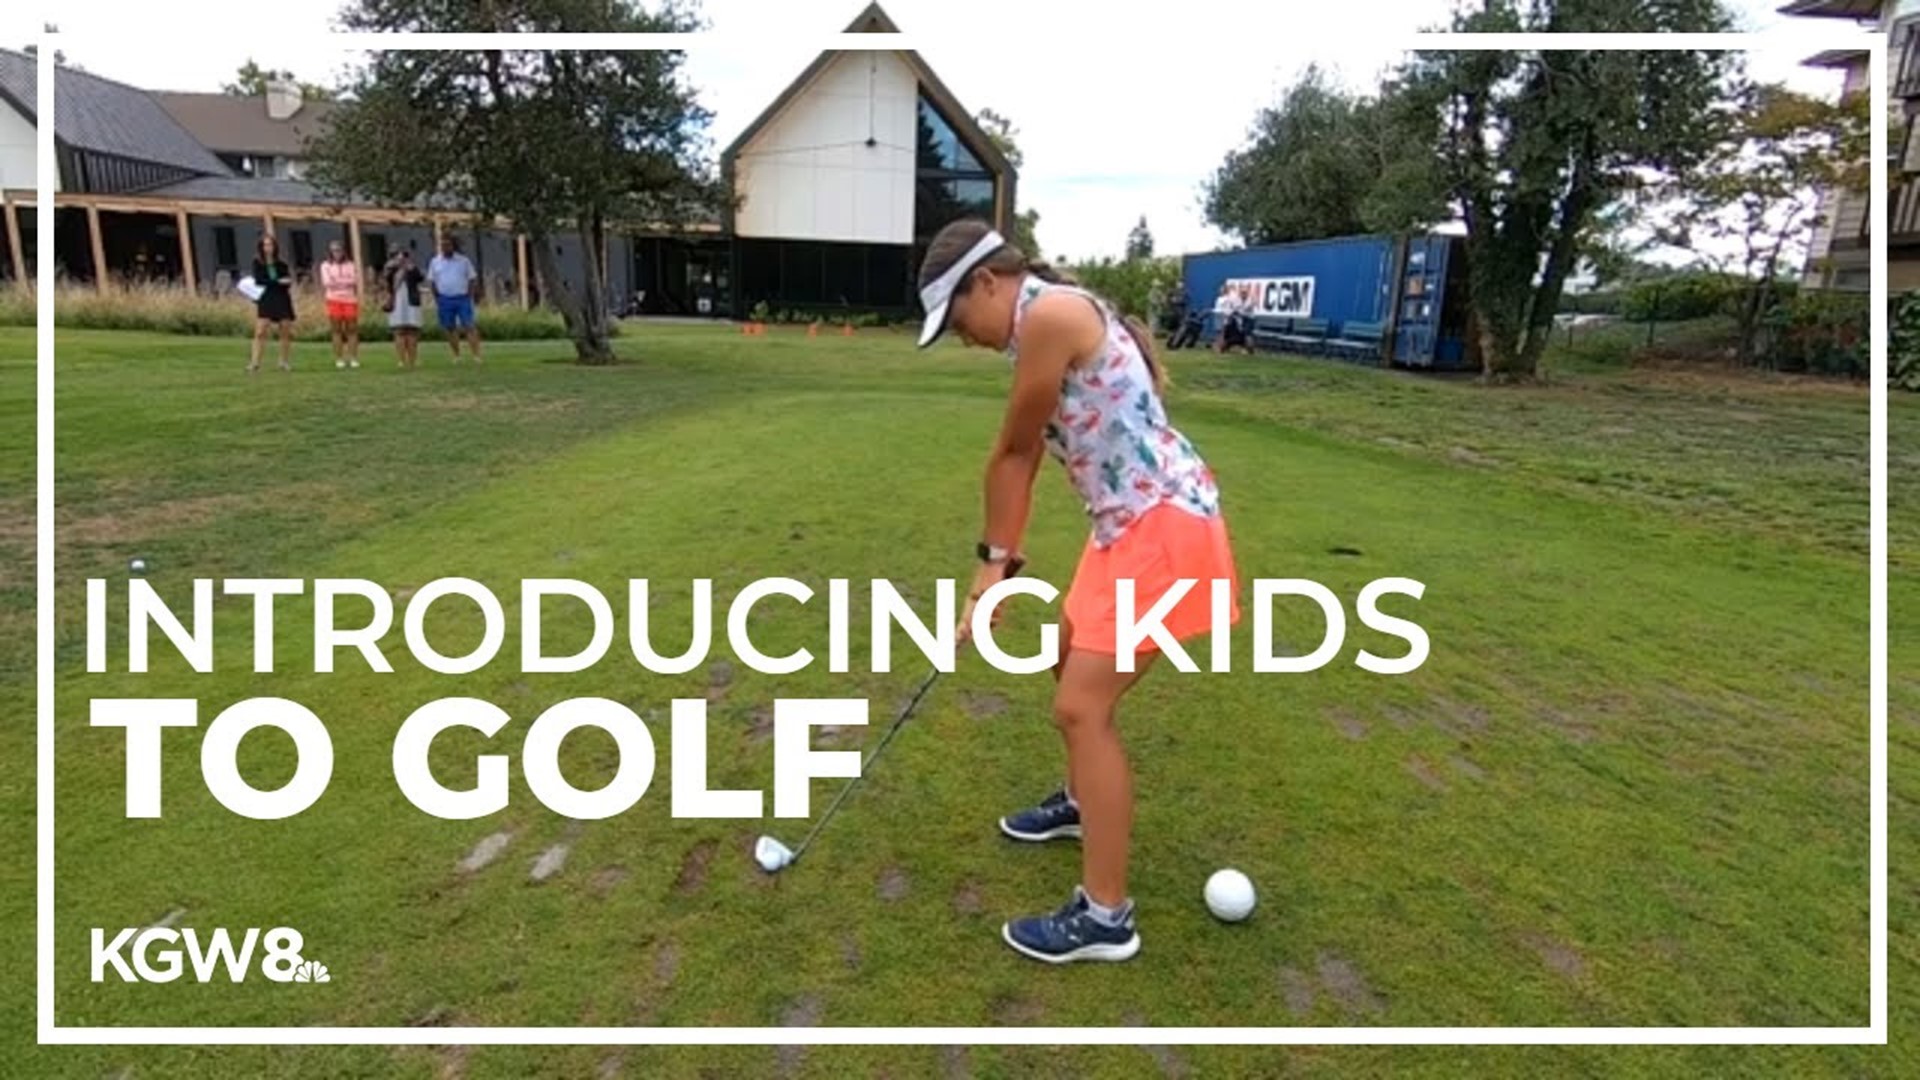 The First Tee is a national program that's been teaching golf to kids since 1997. A few years later, the Portland chapter of The First Tee formed, helping local kids